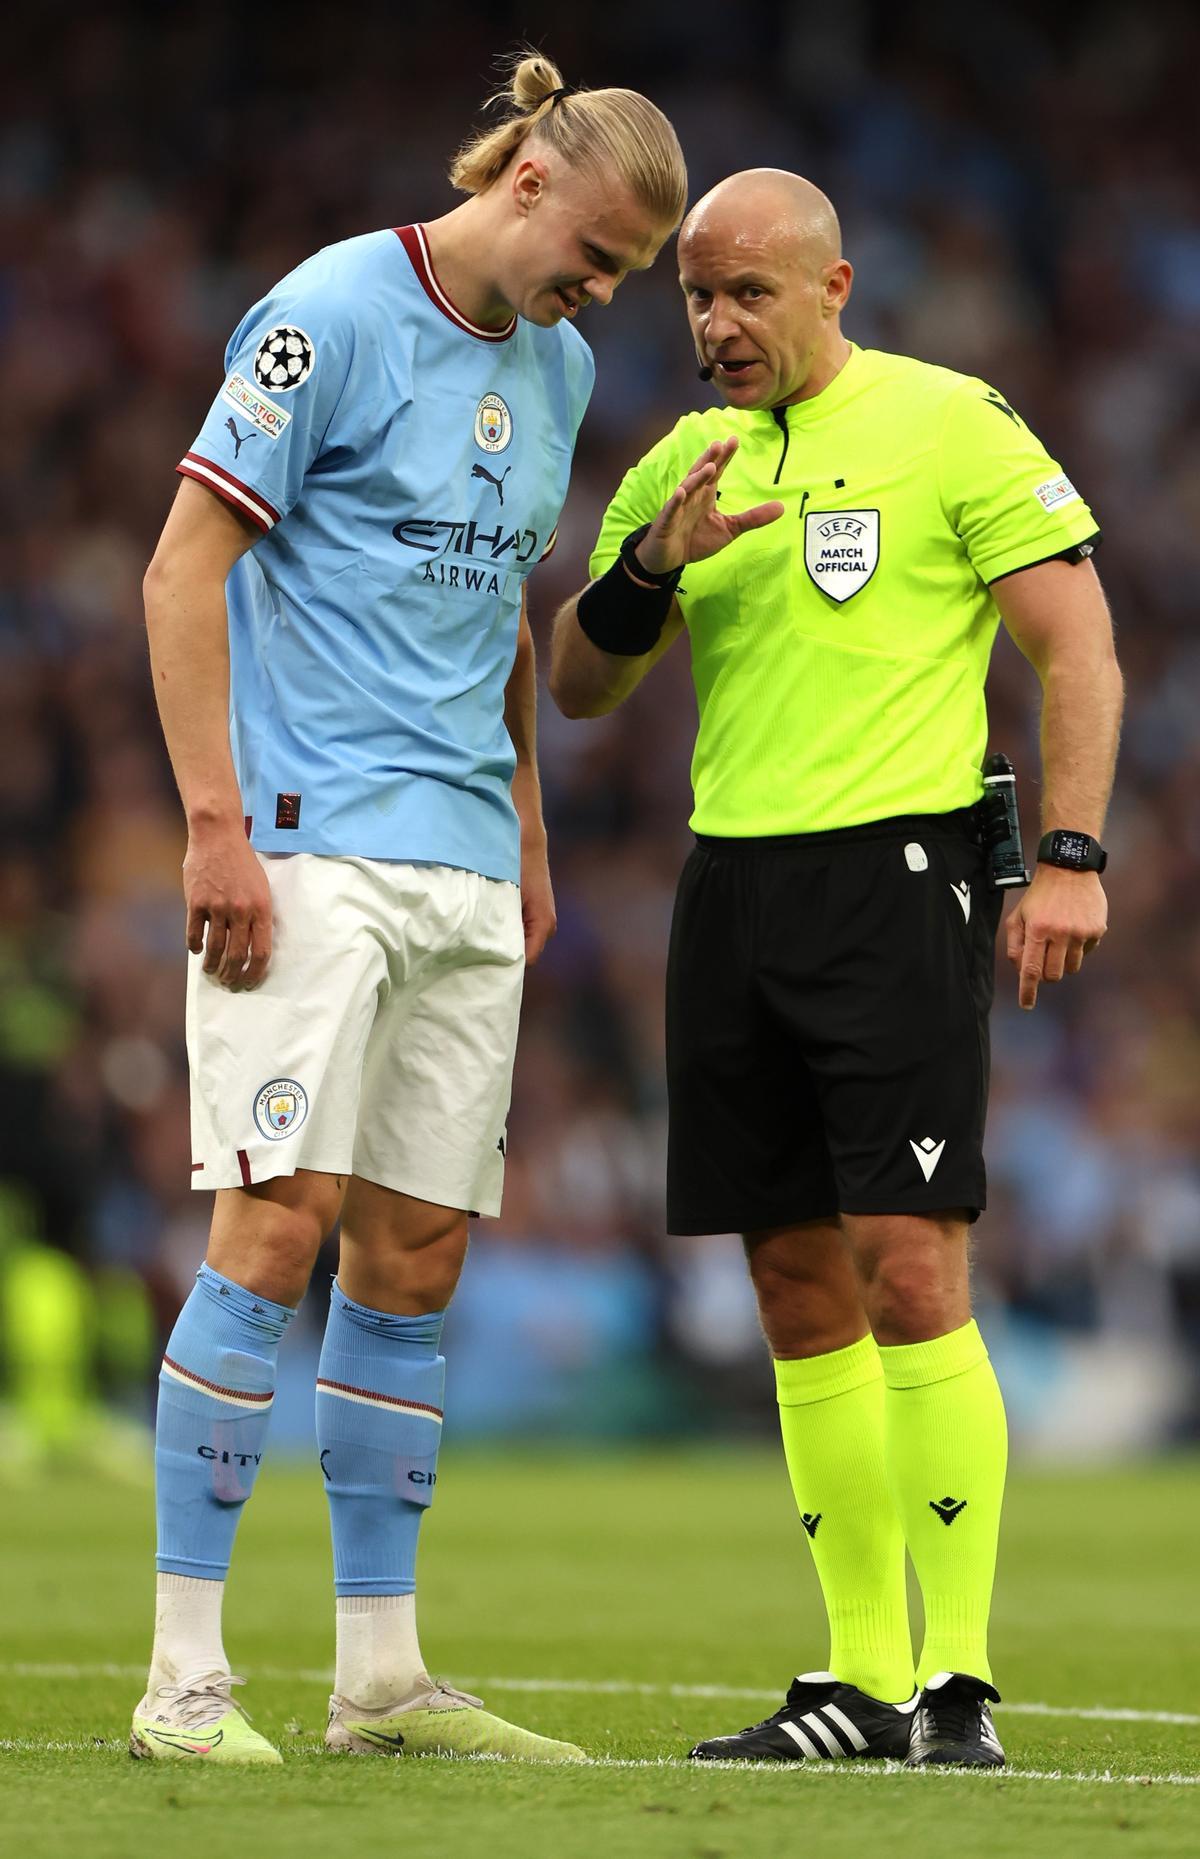 Manchester (United Kingdom), 17/05/2023.- Referee Szymon Marciniak (R) talks to Manchester City forward Erling Haaland during the UEFA Champions League semi-finals, 2nd leg soccer match between Manchester City and Real Madrid in Manchester, Britain, 17 May 2023. (Liga de Campeones, Reino Unido) EFE/EPA/DAVID RAWCLIFFE